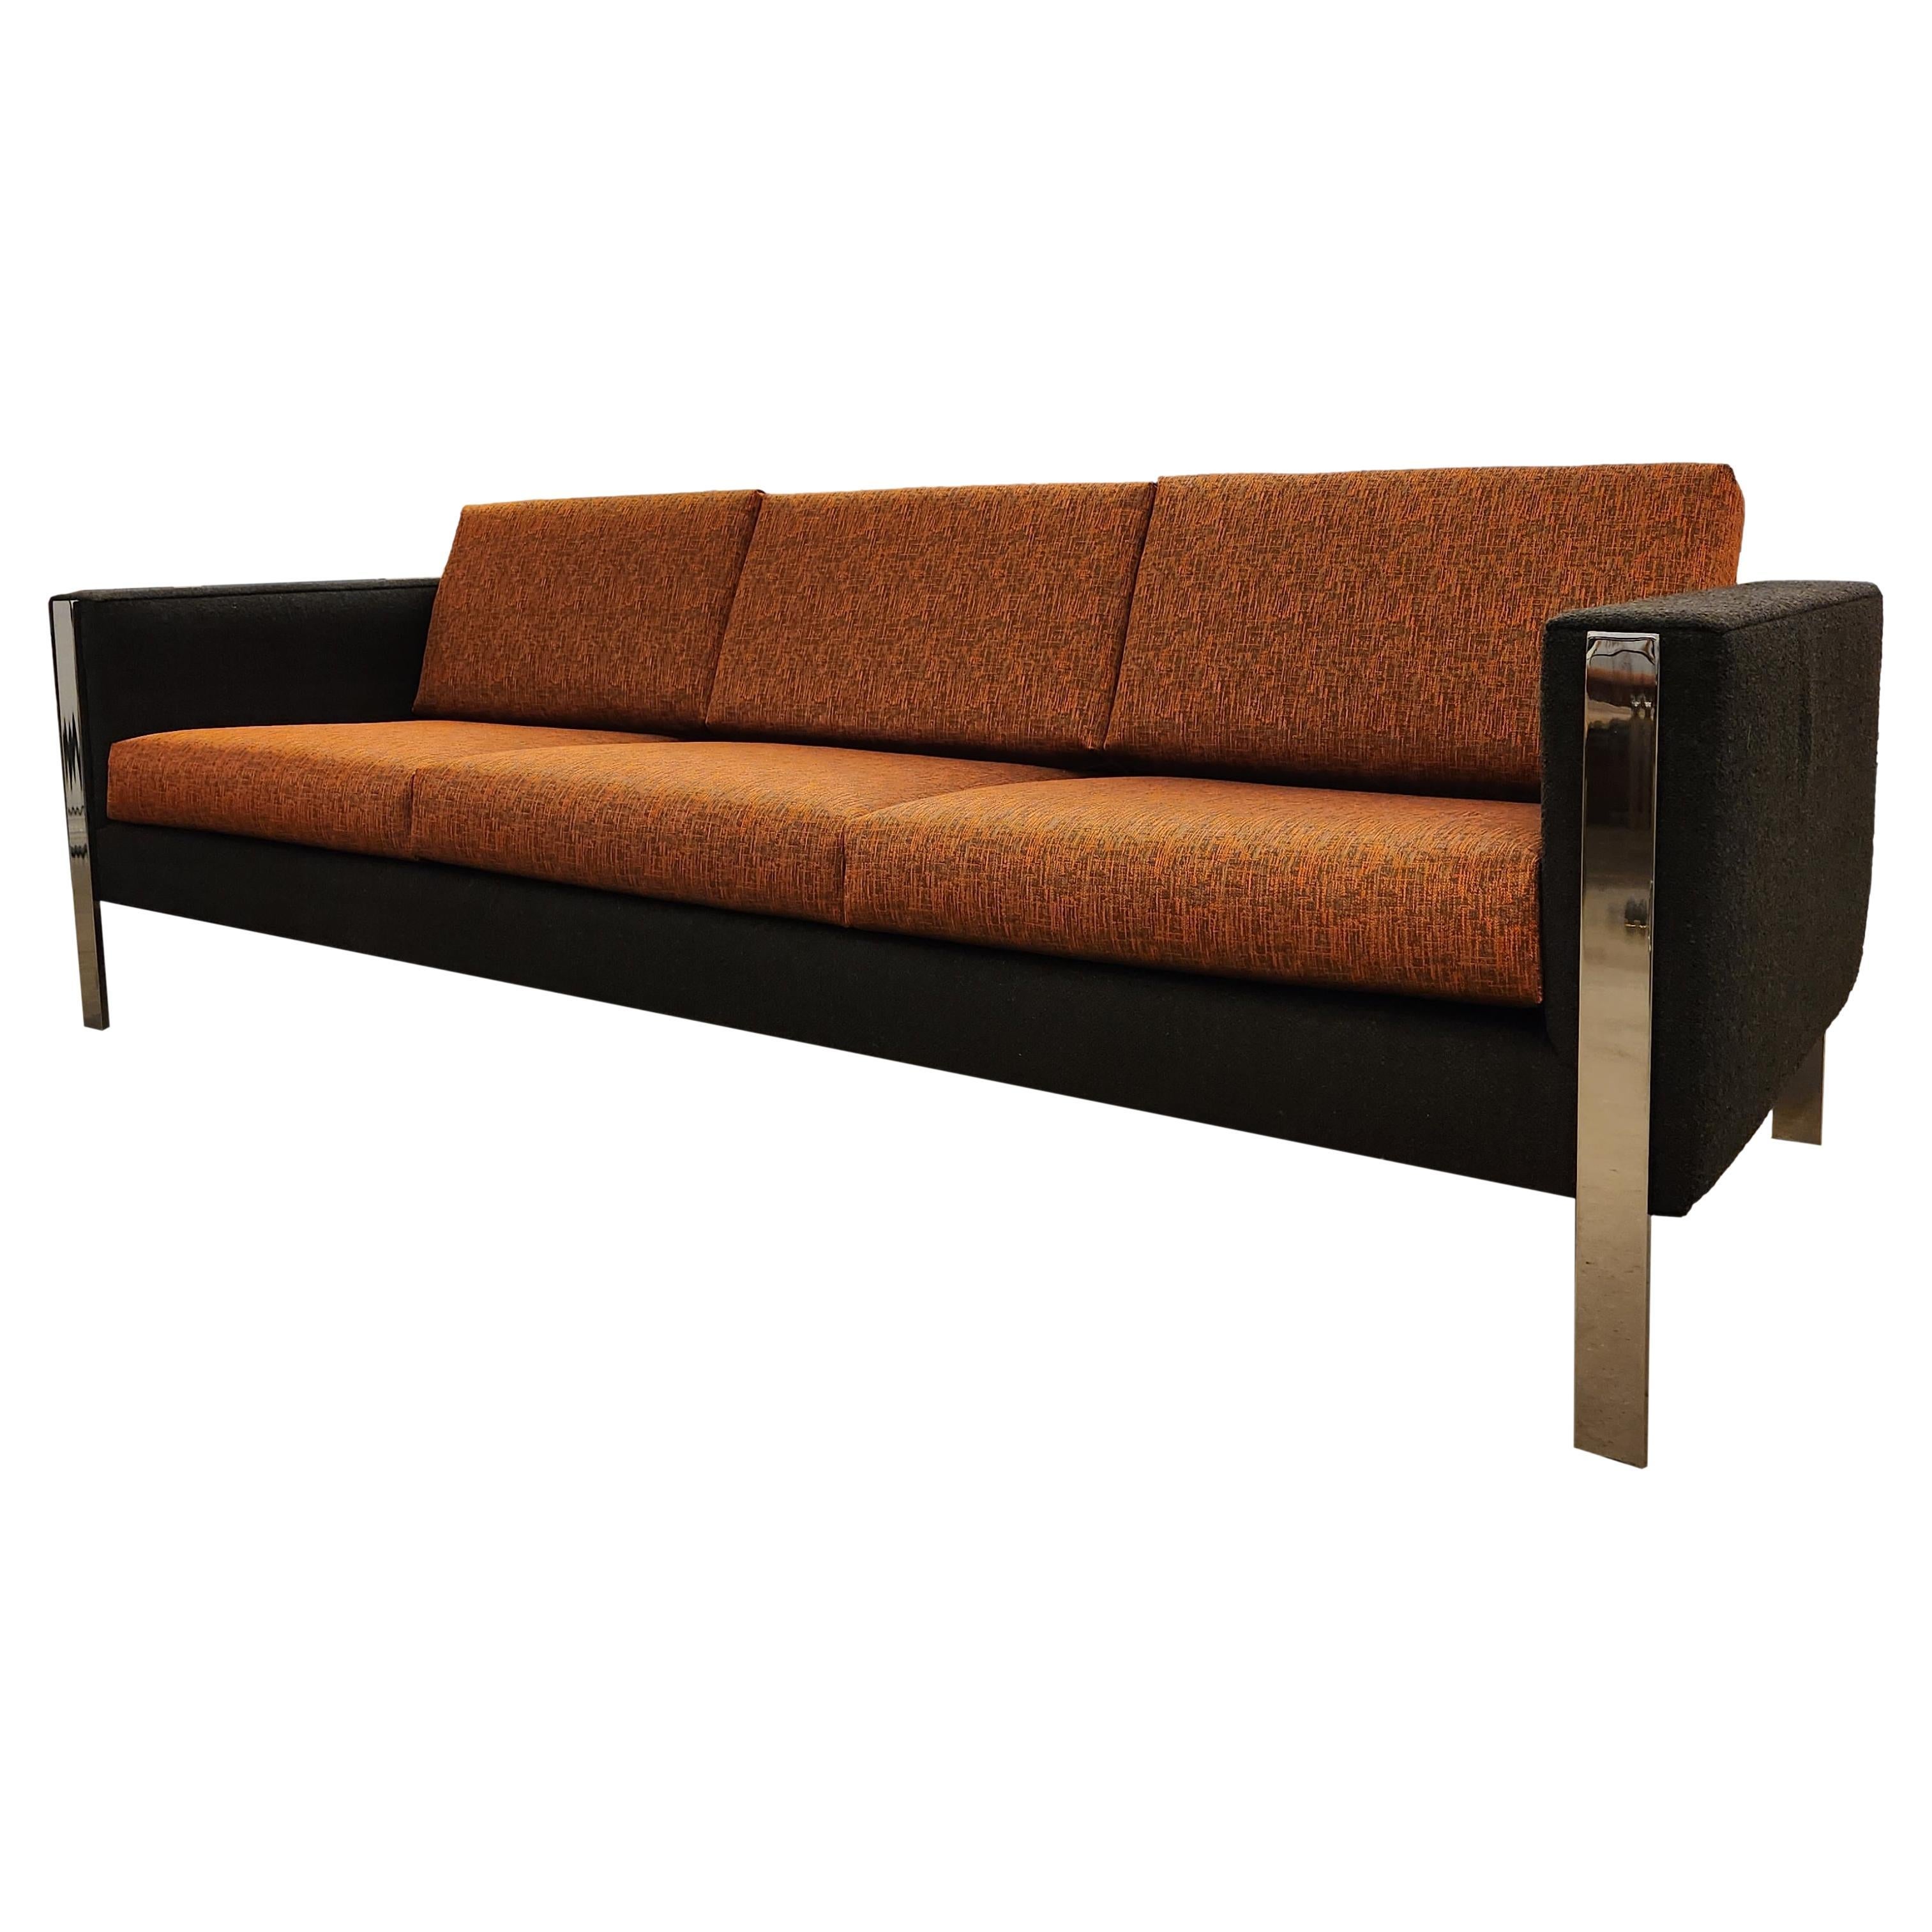 3 Seater Modern Sofa For Sale